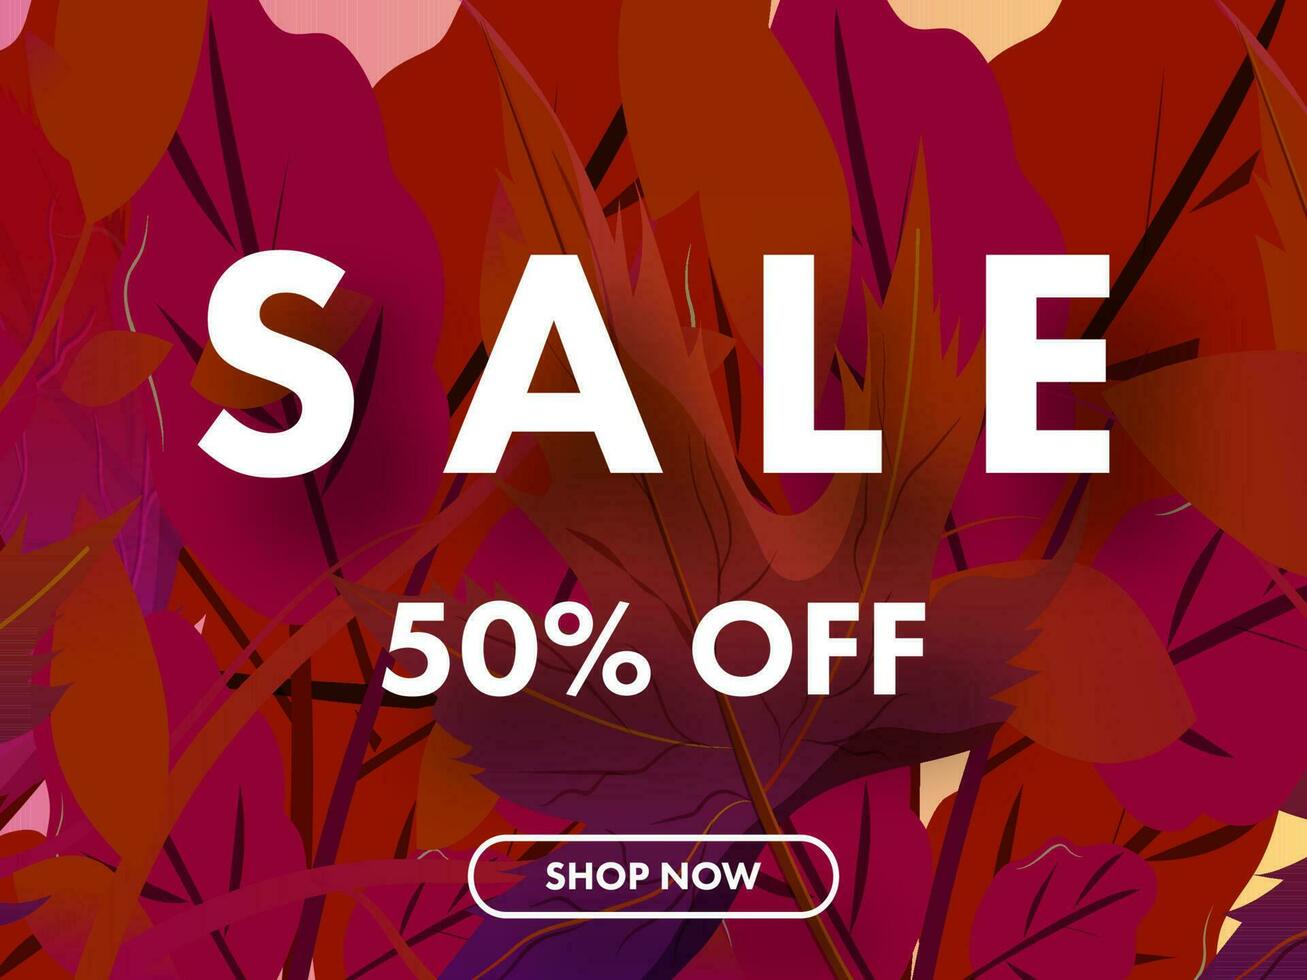 Sale Poster Or Banner Design With Discount Offer On Gradient Leaves Background. vector